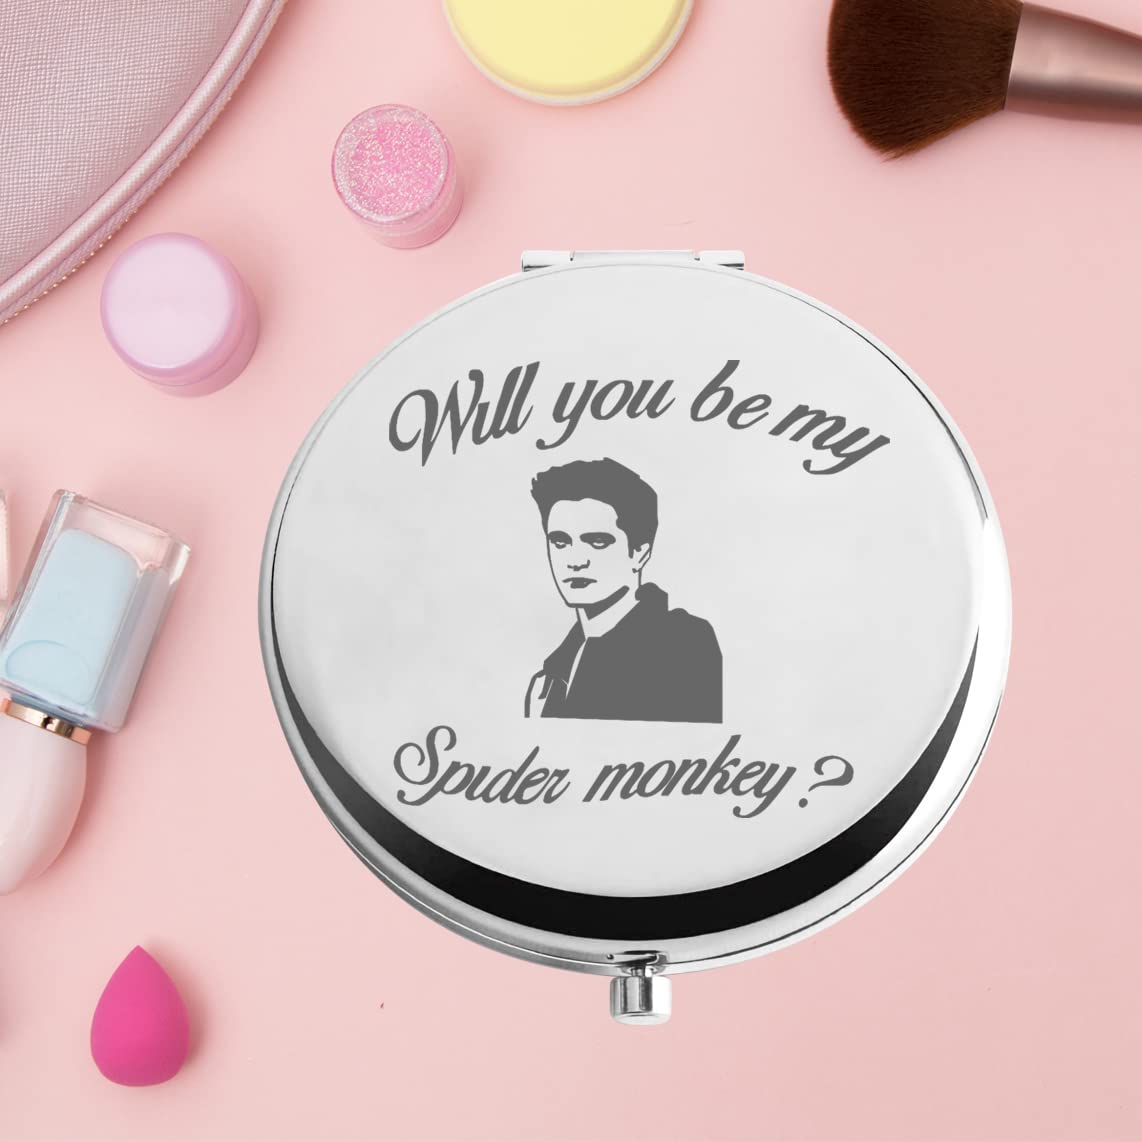 KEYCHIN Twilight Movie Pocket Mirror Twilight Edward and Bella Fans Gifts Will You Be My Spider Monkey Compact Mirror for Women Girls Teenager (Spider monkey-S)